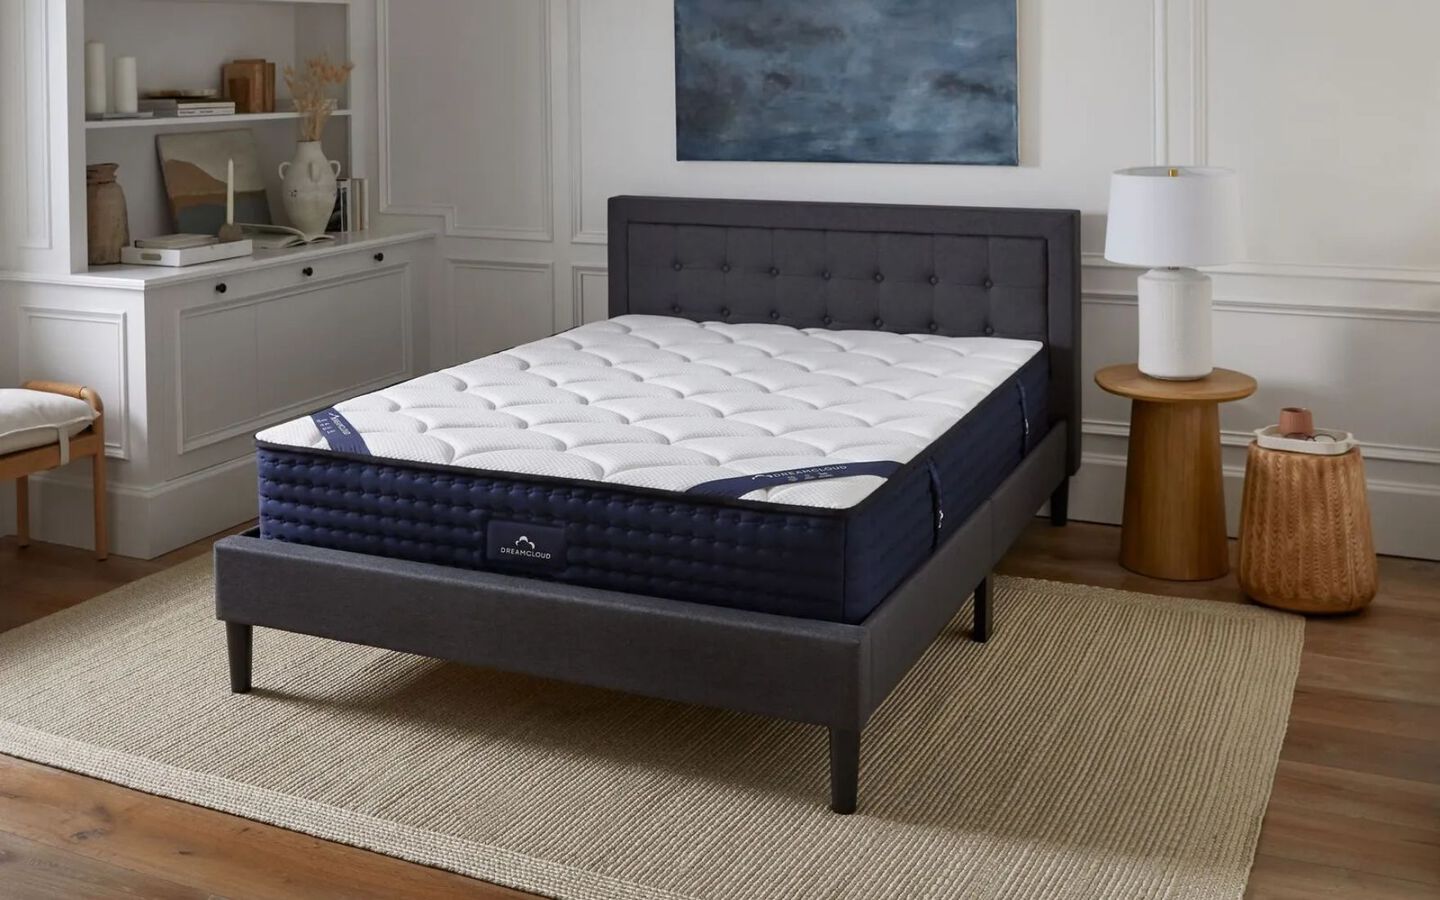 Navy and white mattress on a dark grey upholstered bedframe